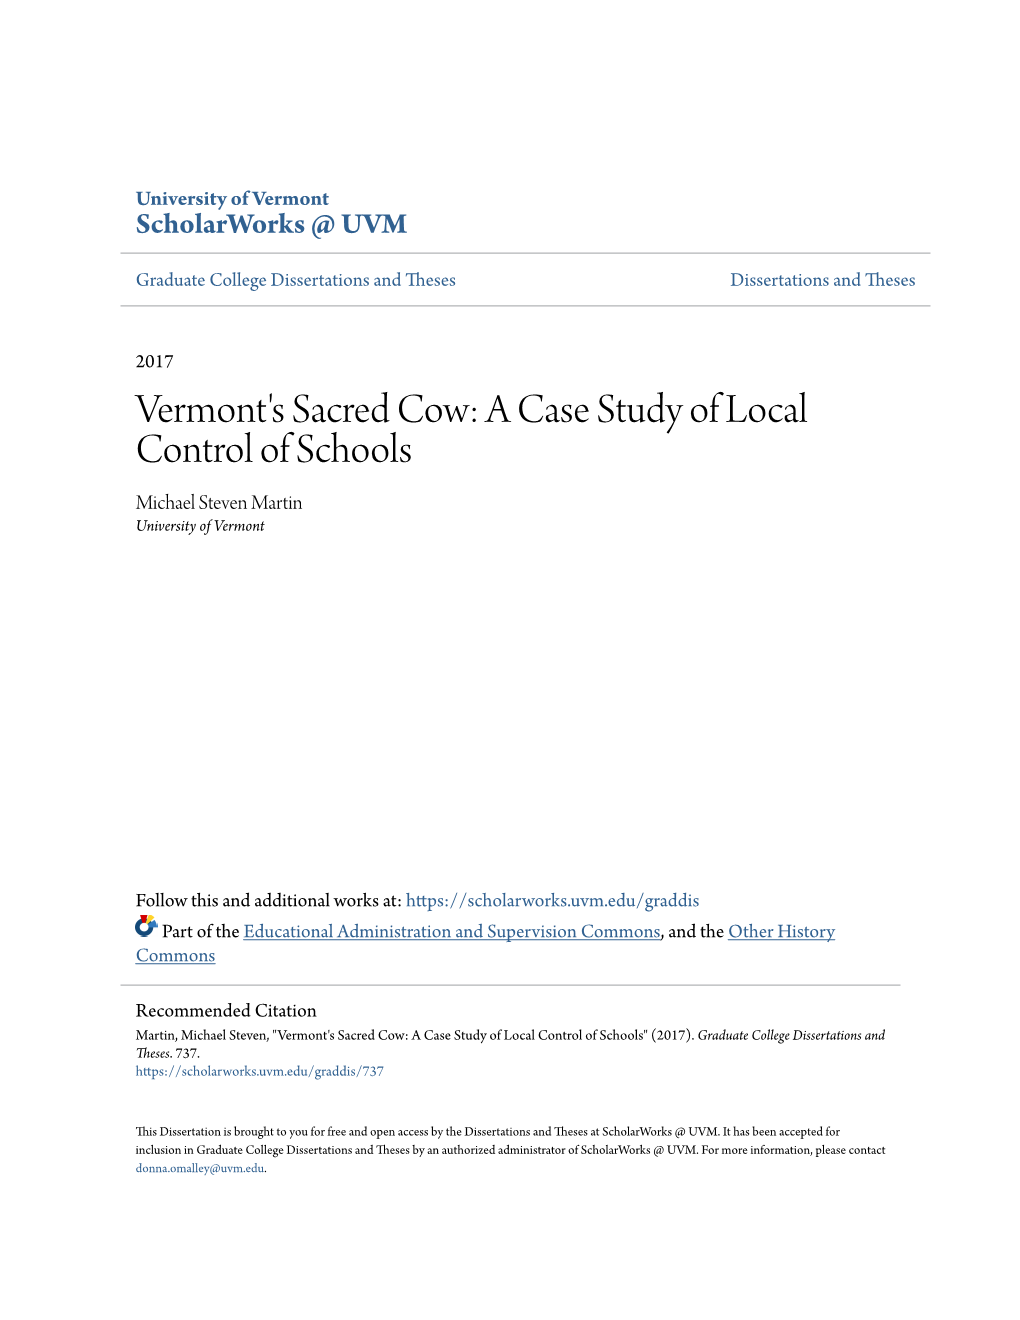 A Case Study of Local Control of Schools Michael Steven Martin University of Vermont